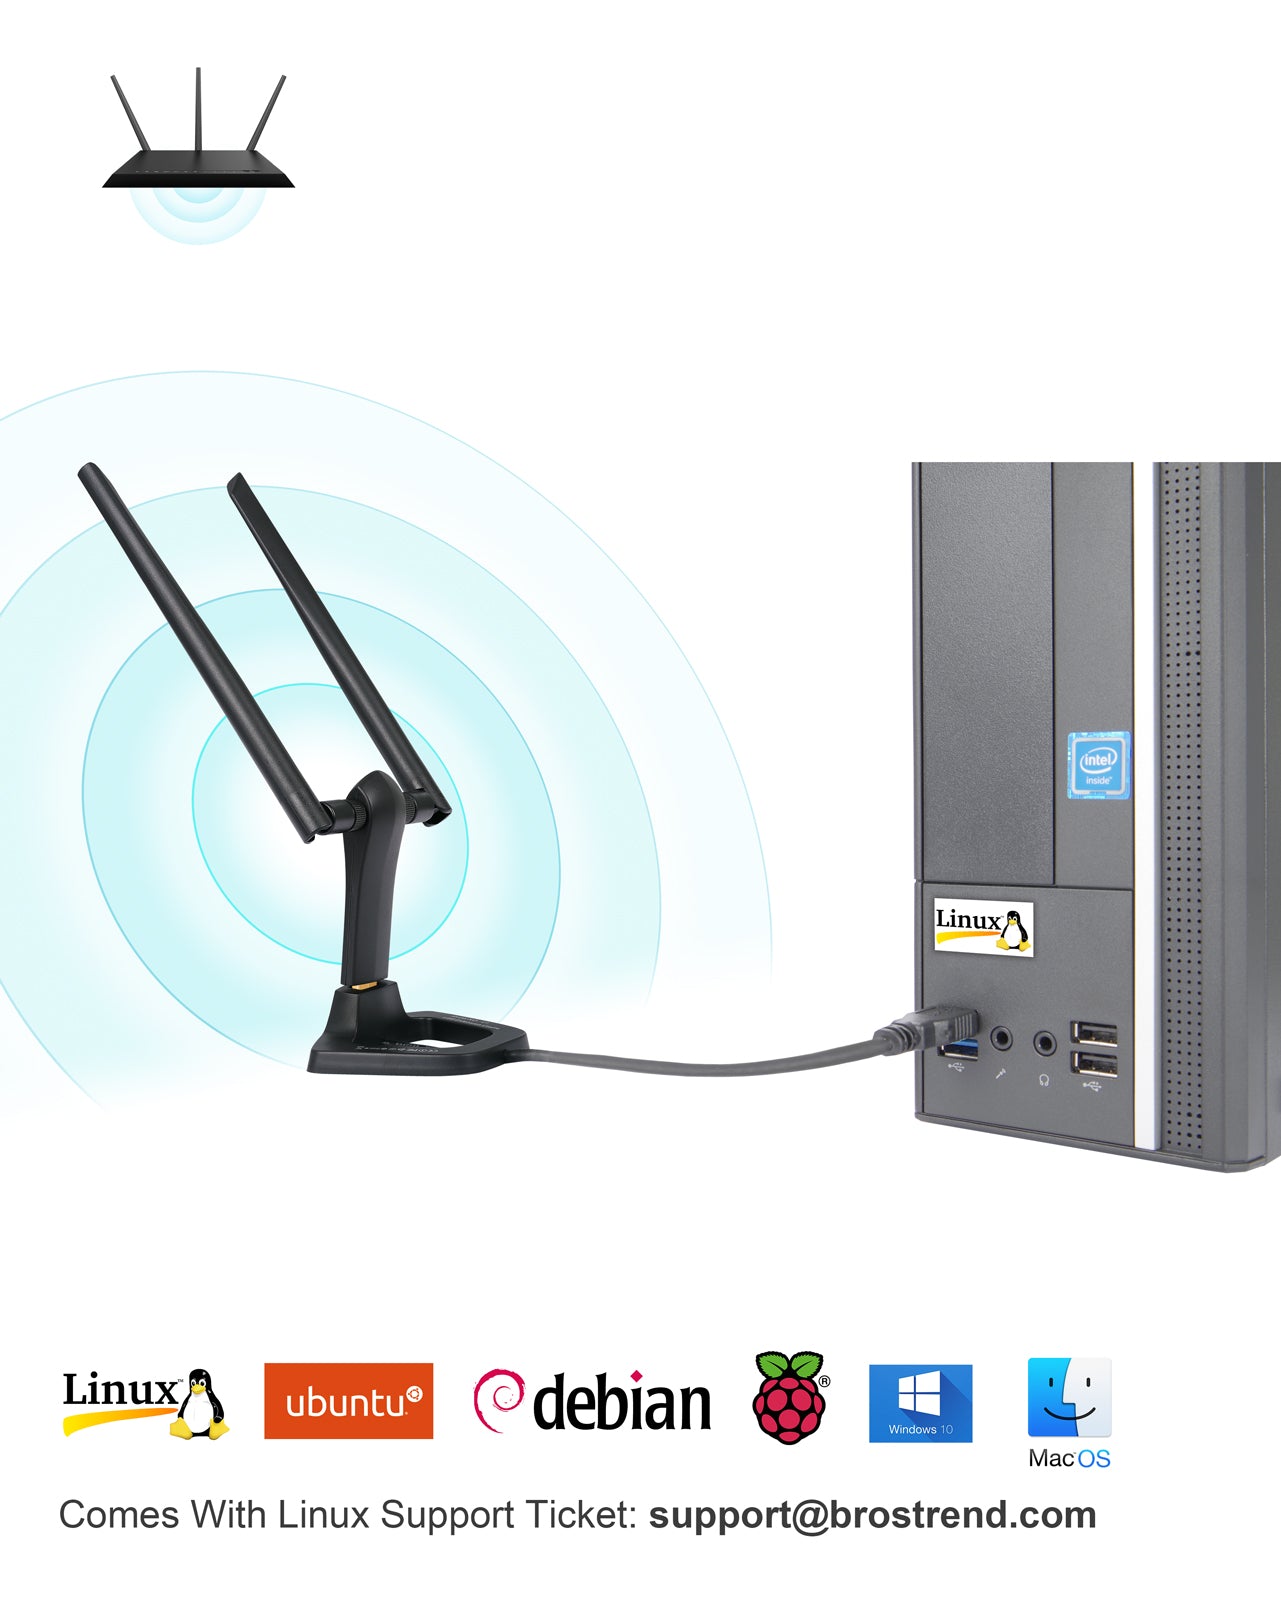 BrosTrend 1200Mbps Linux USB WiFi Network Adapter For UK Market